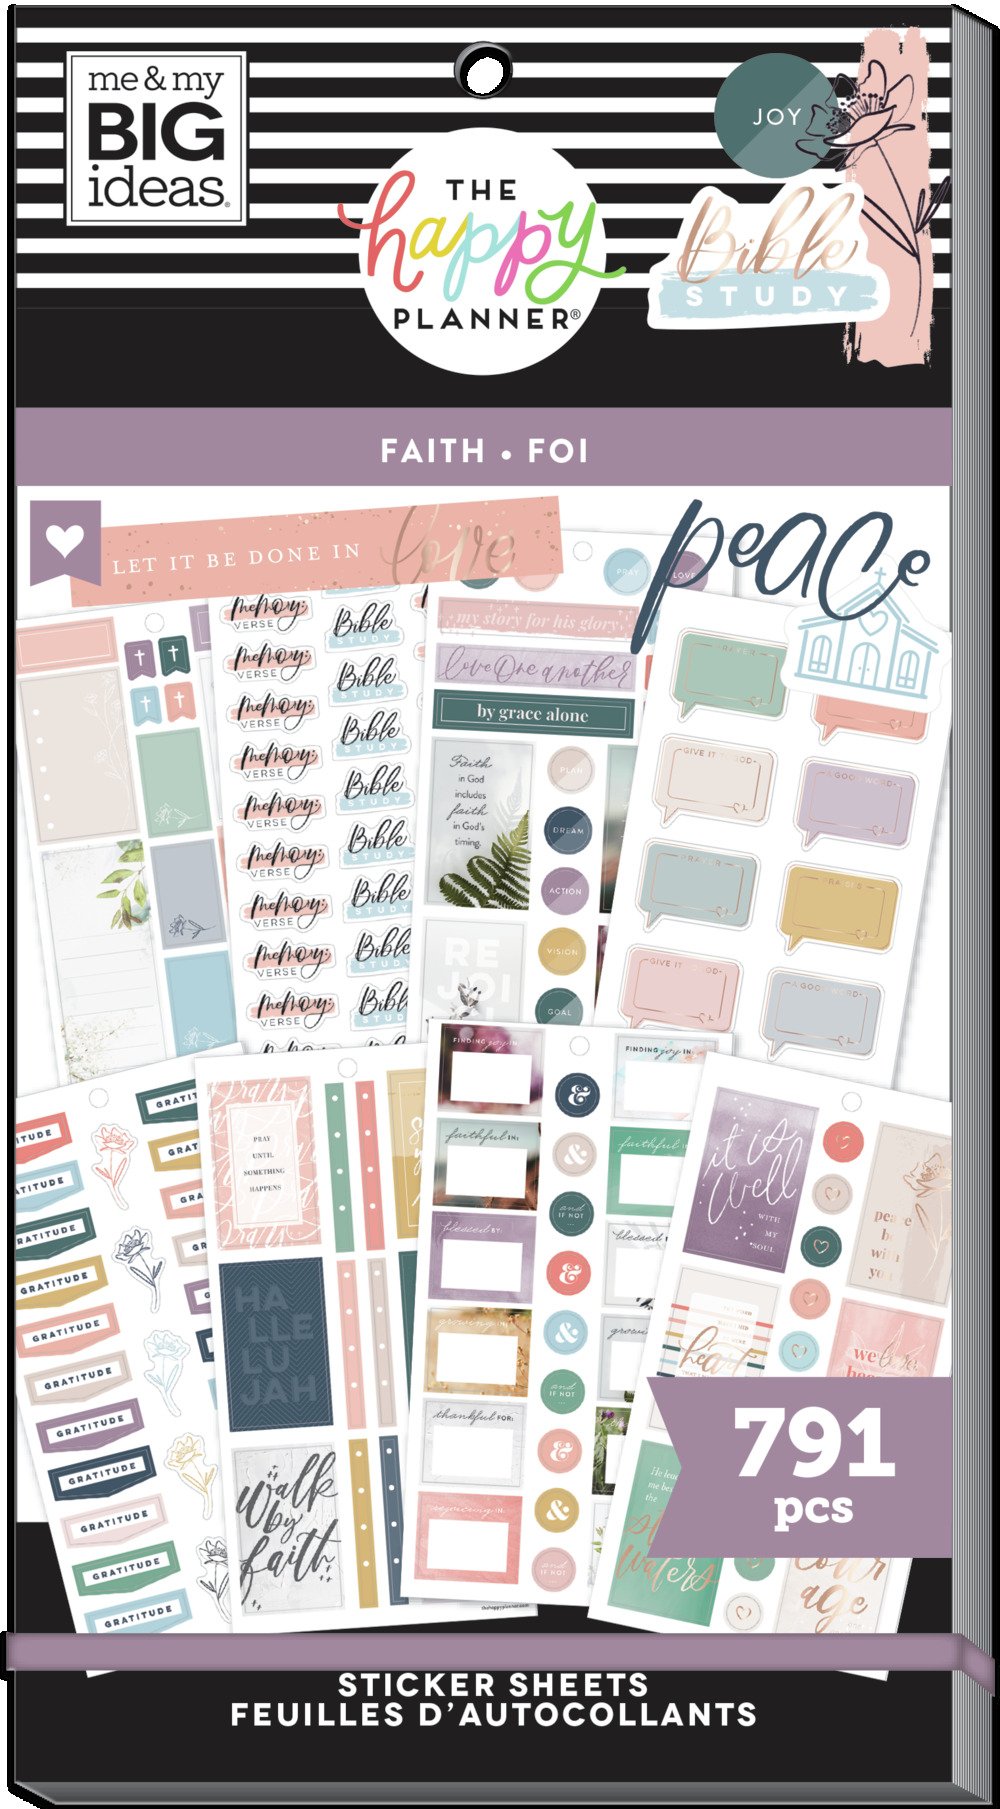 Value Pack Stickers - Walk By Faith – The Happy Planner